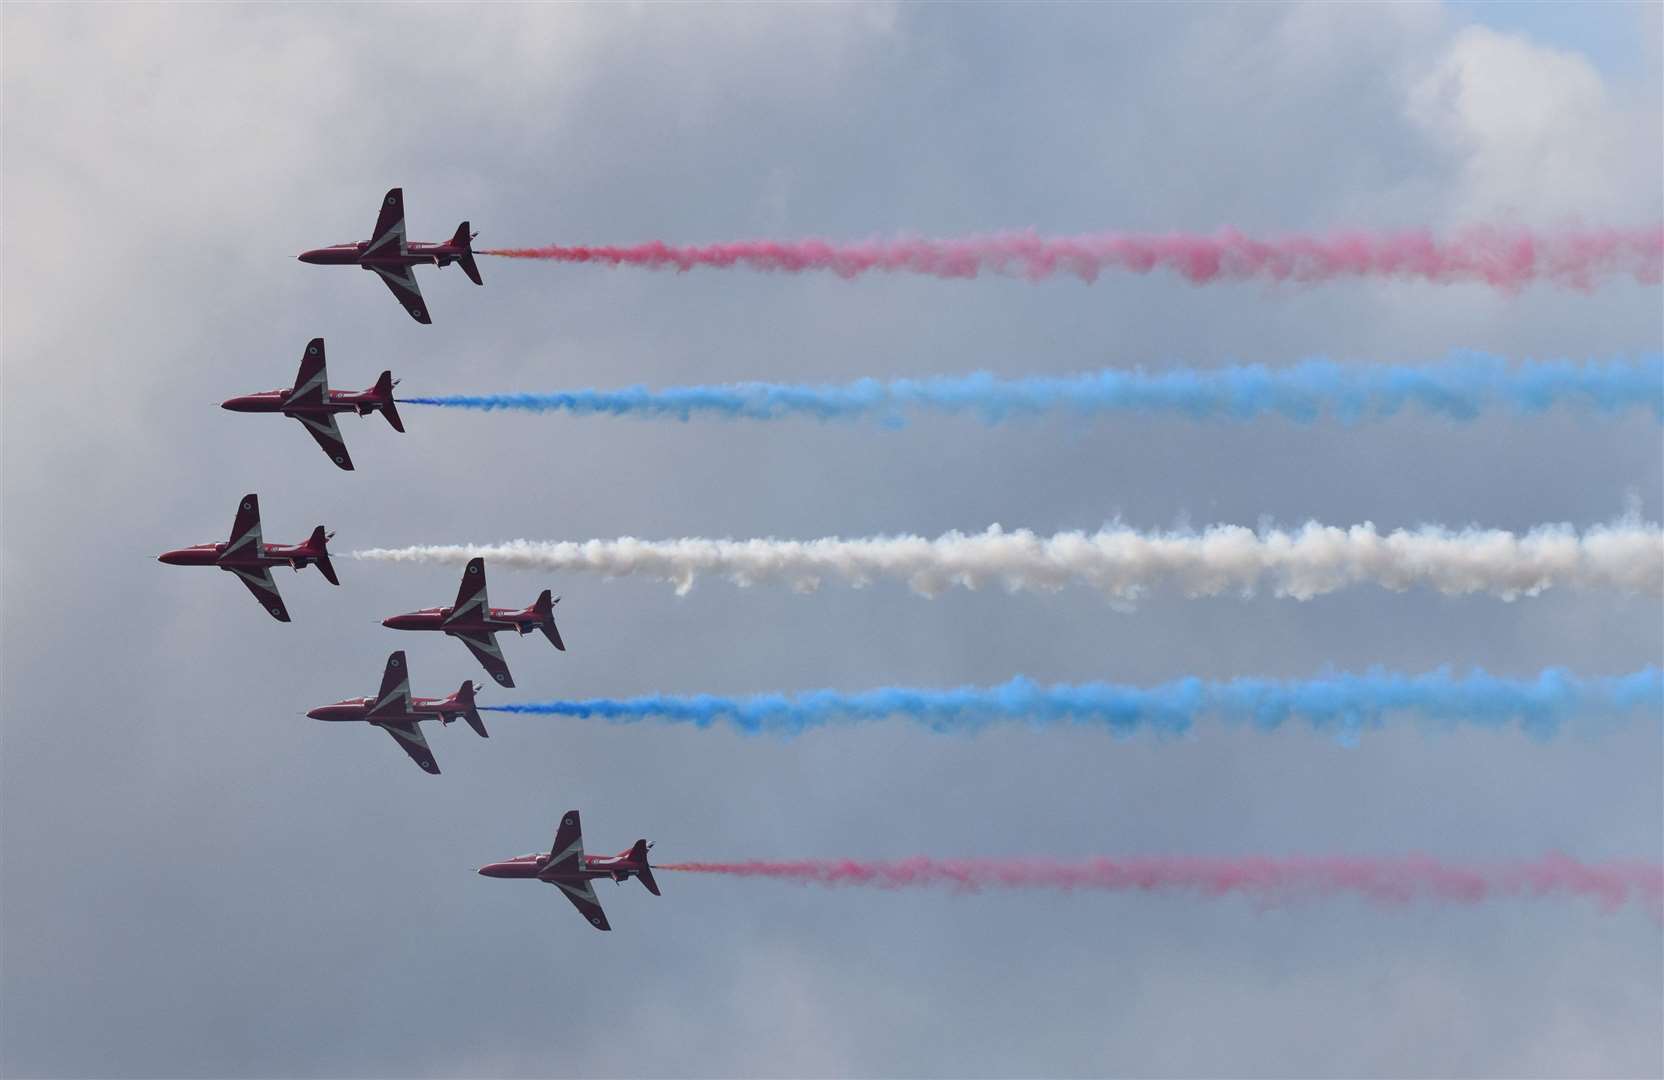 The Red Arrows have flown almost 5,000 displays around the world. Photo: R. S. Mortiss